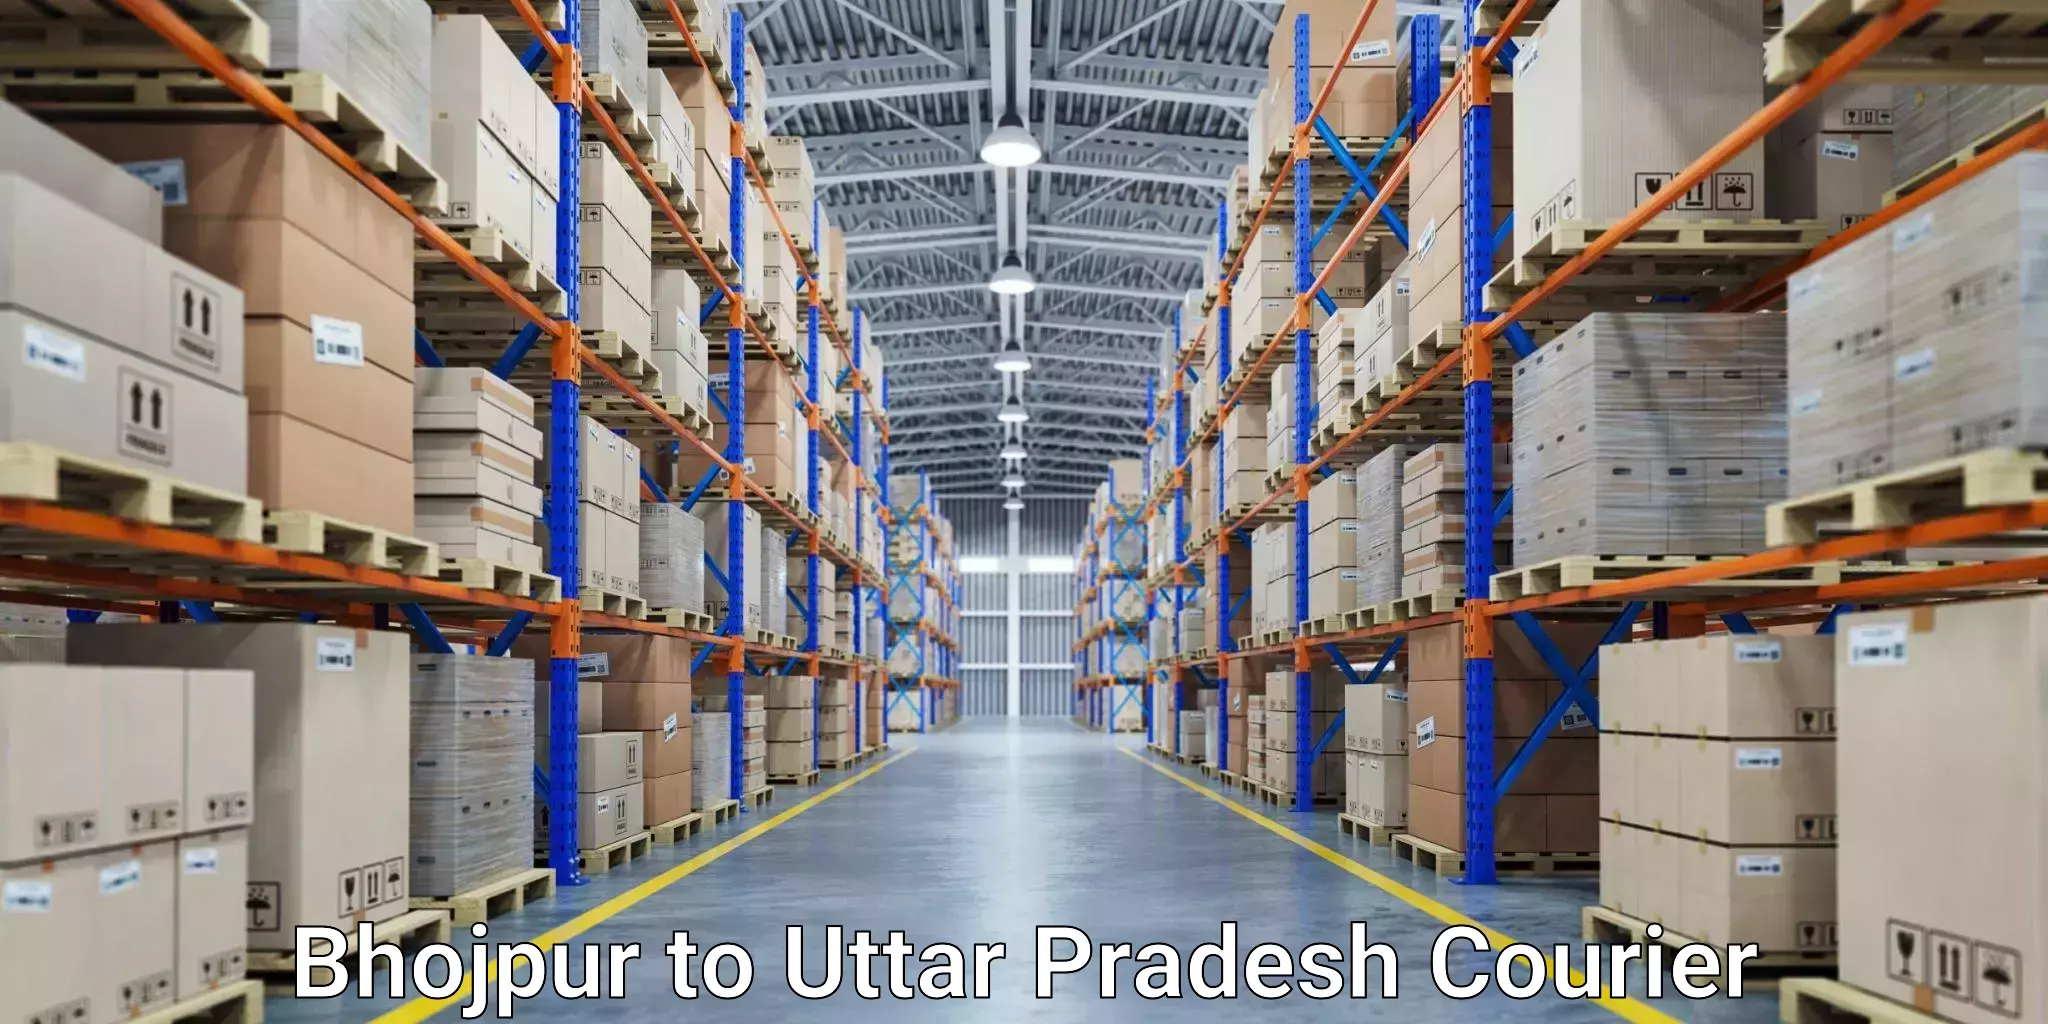 State-of-the-art courier technology Bhojpur to Karchhana